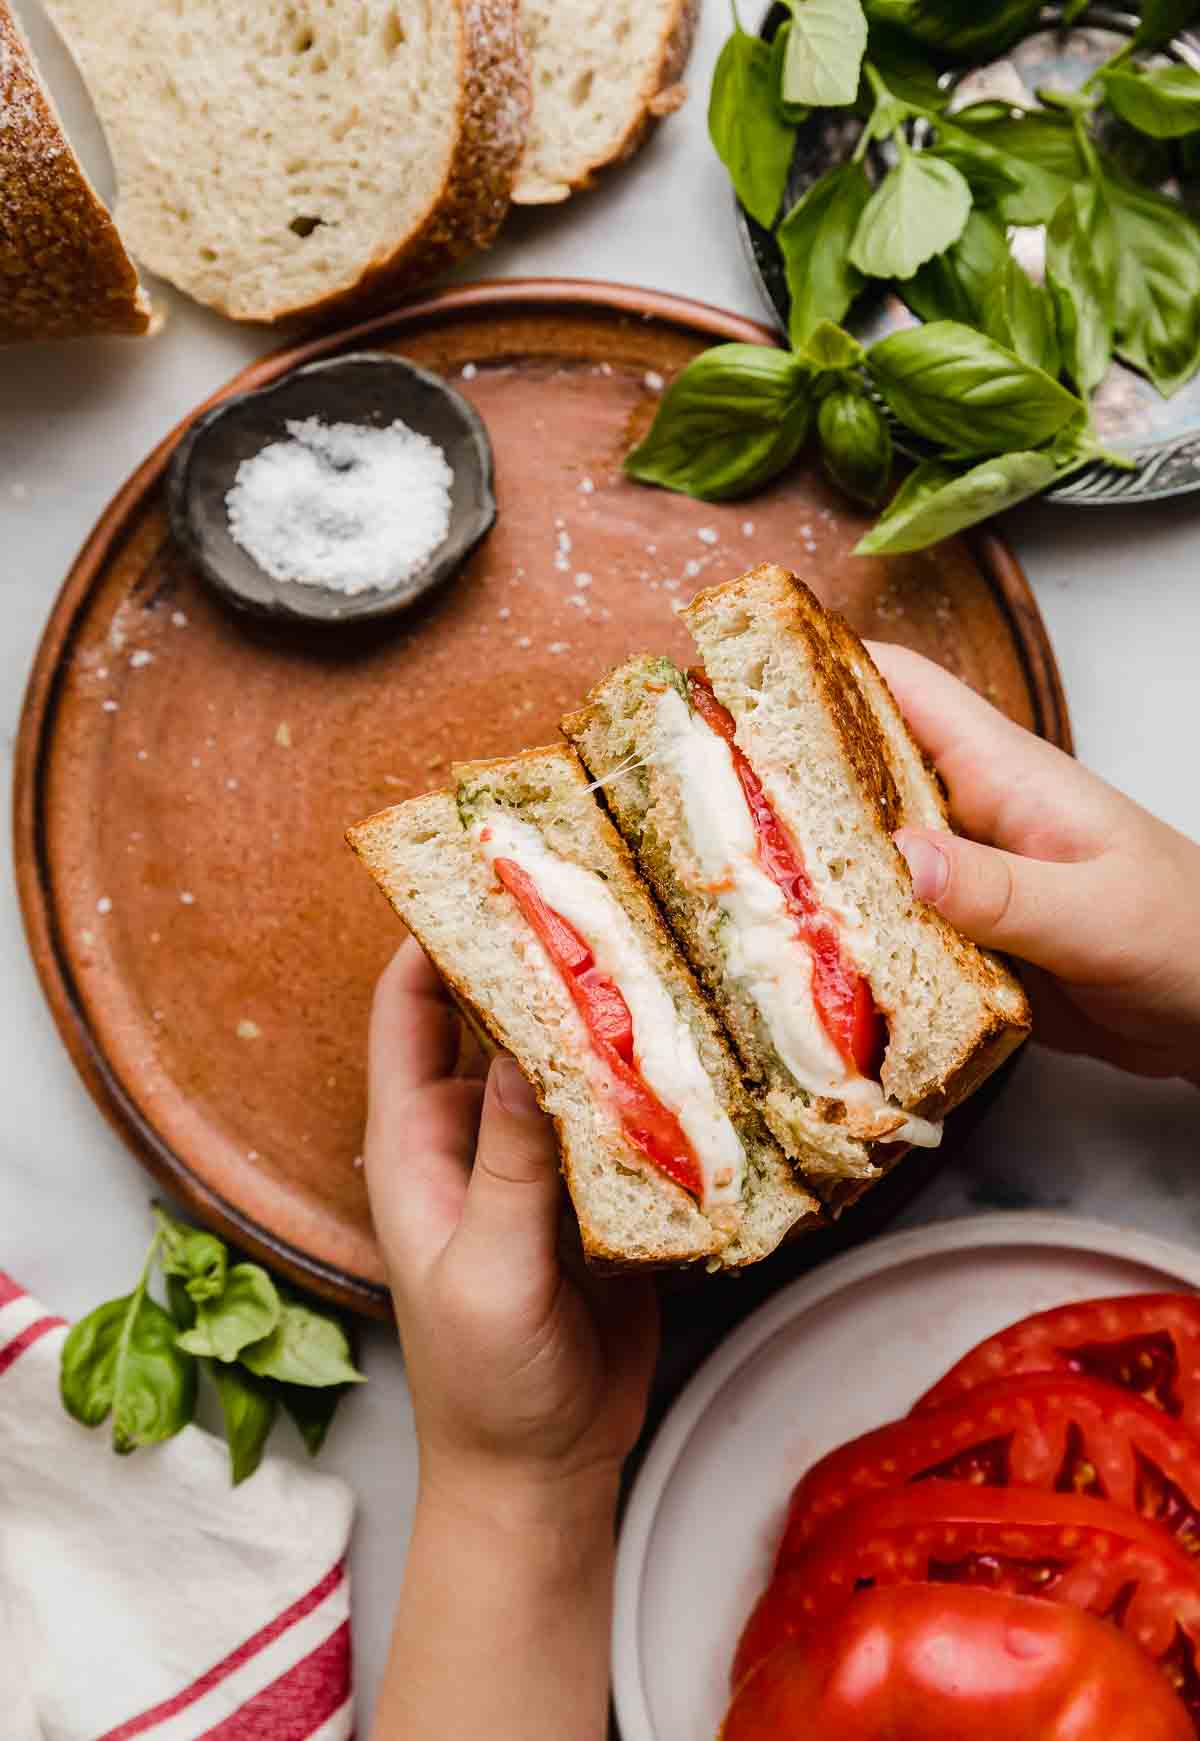 A pair of hands holding two halves of a Pesto Mozzarella Sandwich with tomato over a brown plate.